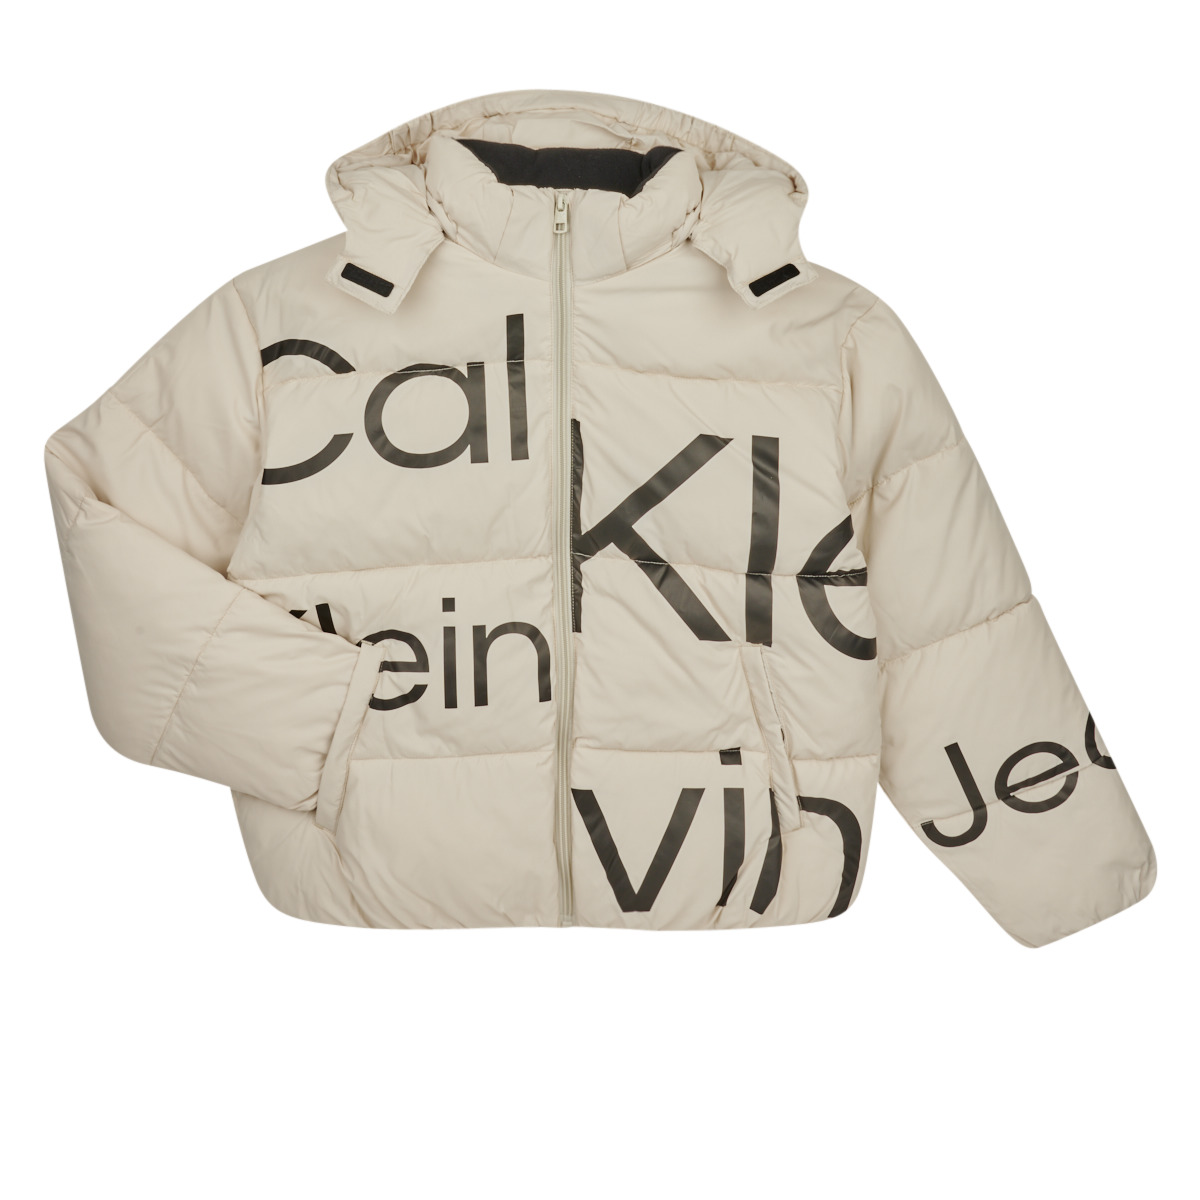 Calvin Klein Jeans INSTITUTIONAL Europe BOLD delivery Clothing 176,00 PUFFER ! Child Spartoo | € - - Duffel LOGO JACKET White Fast coats